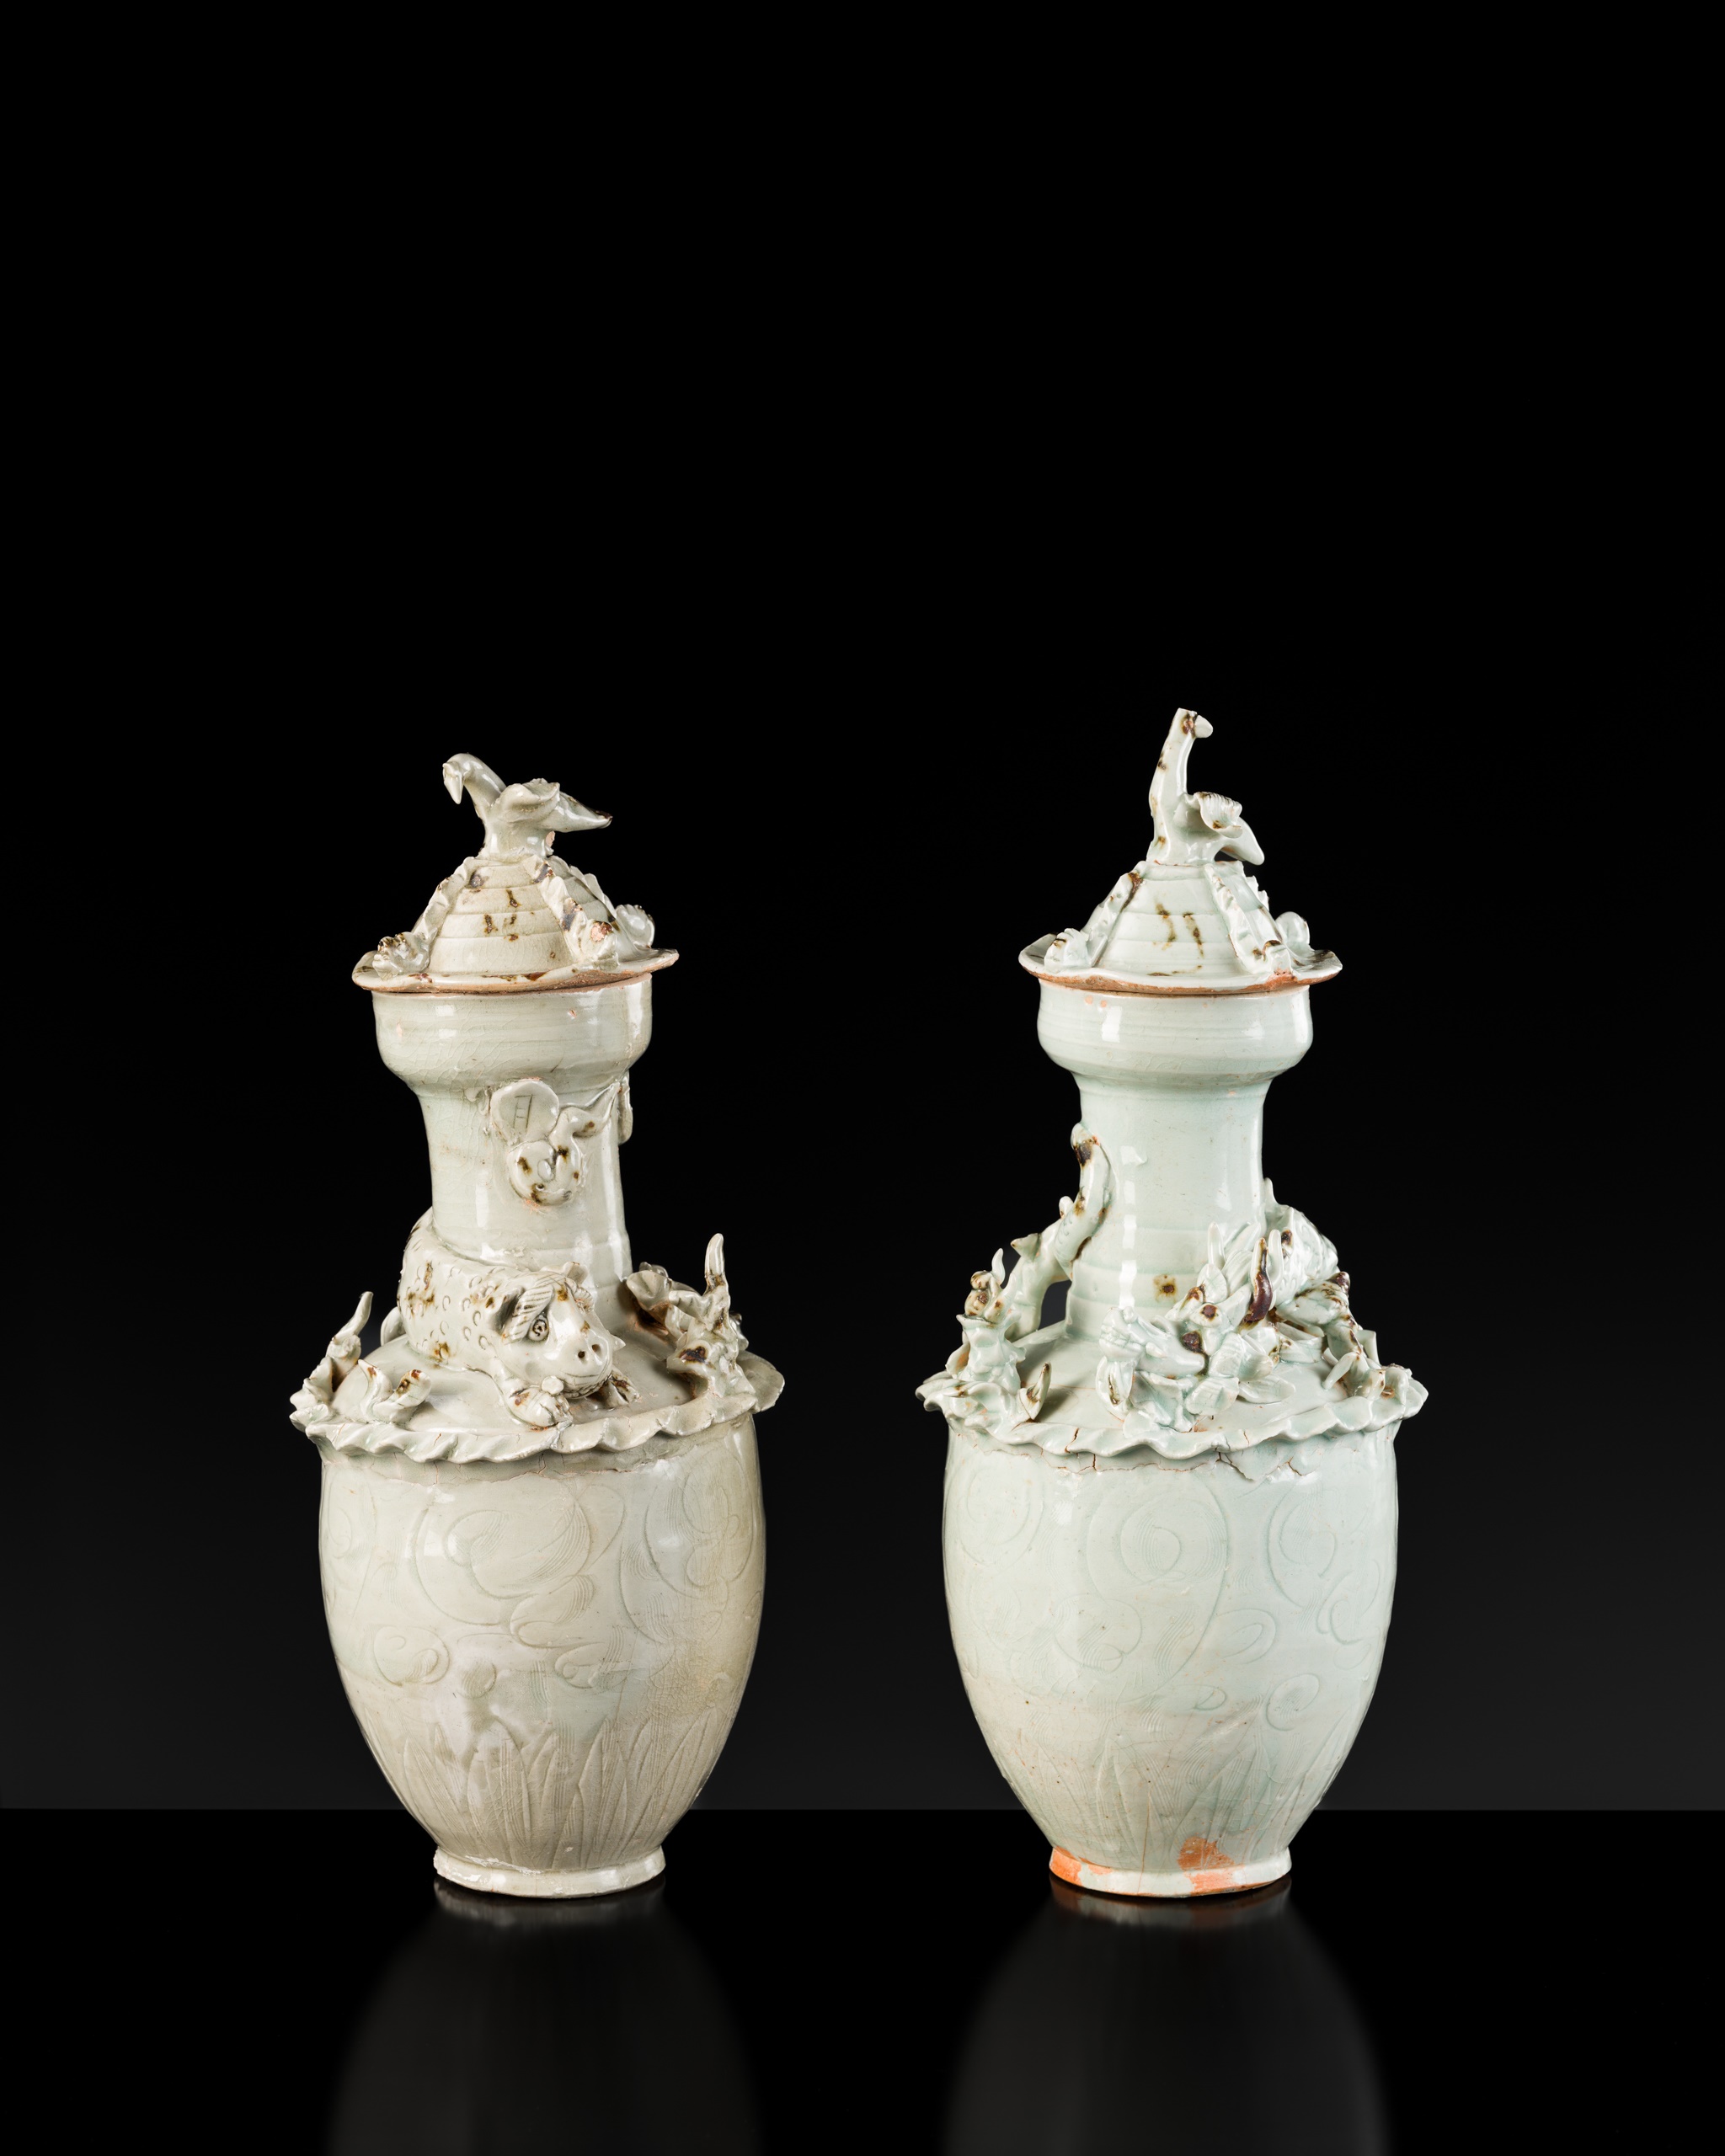 A PAIR OF QINGBAI FUNERARY JARS AND COVERS, SONG DYNASTY - Image 10 of 12